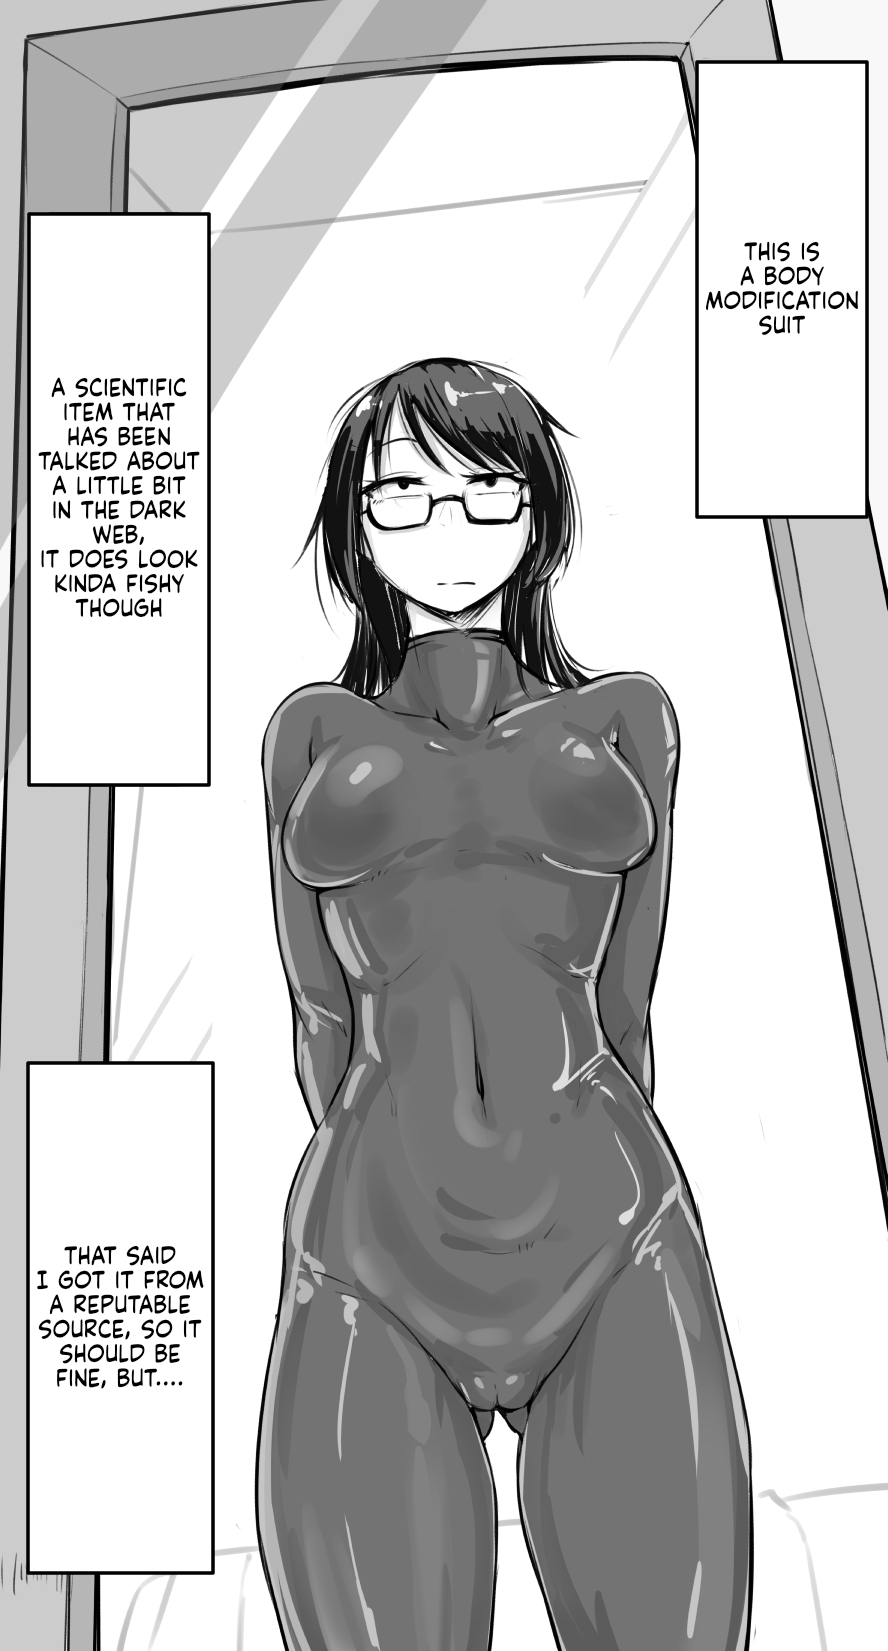 A Geek girl getting the ideal body (1-4) - Page 3